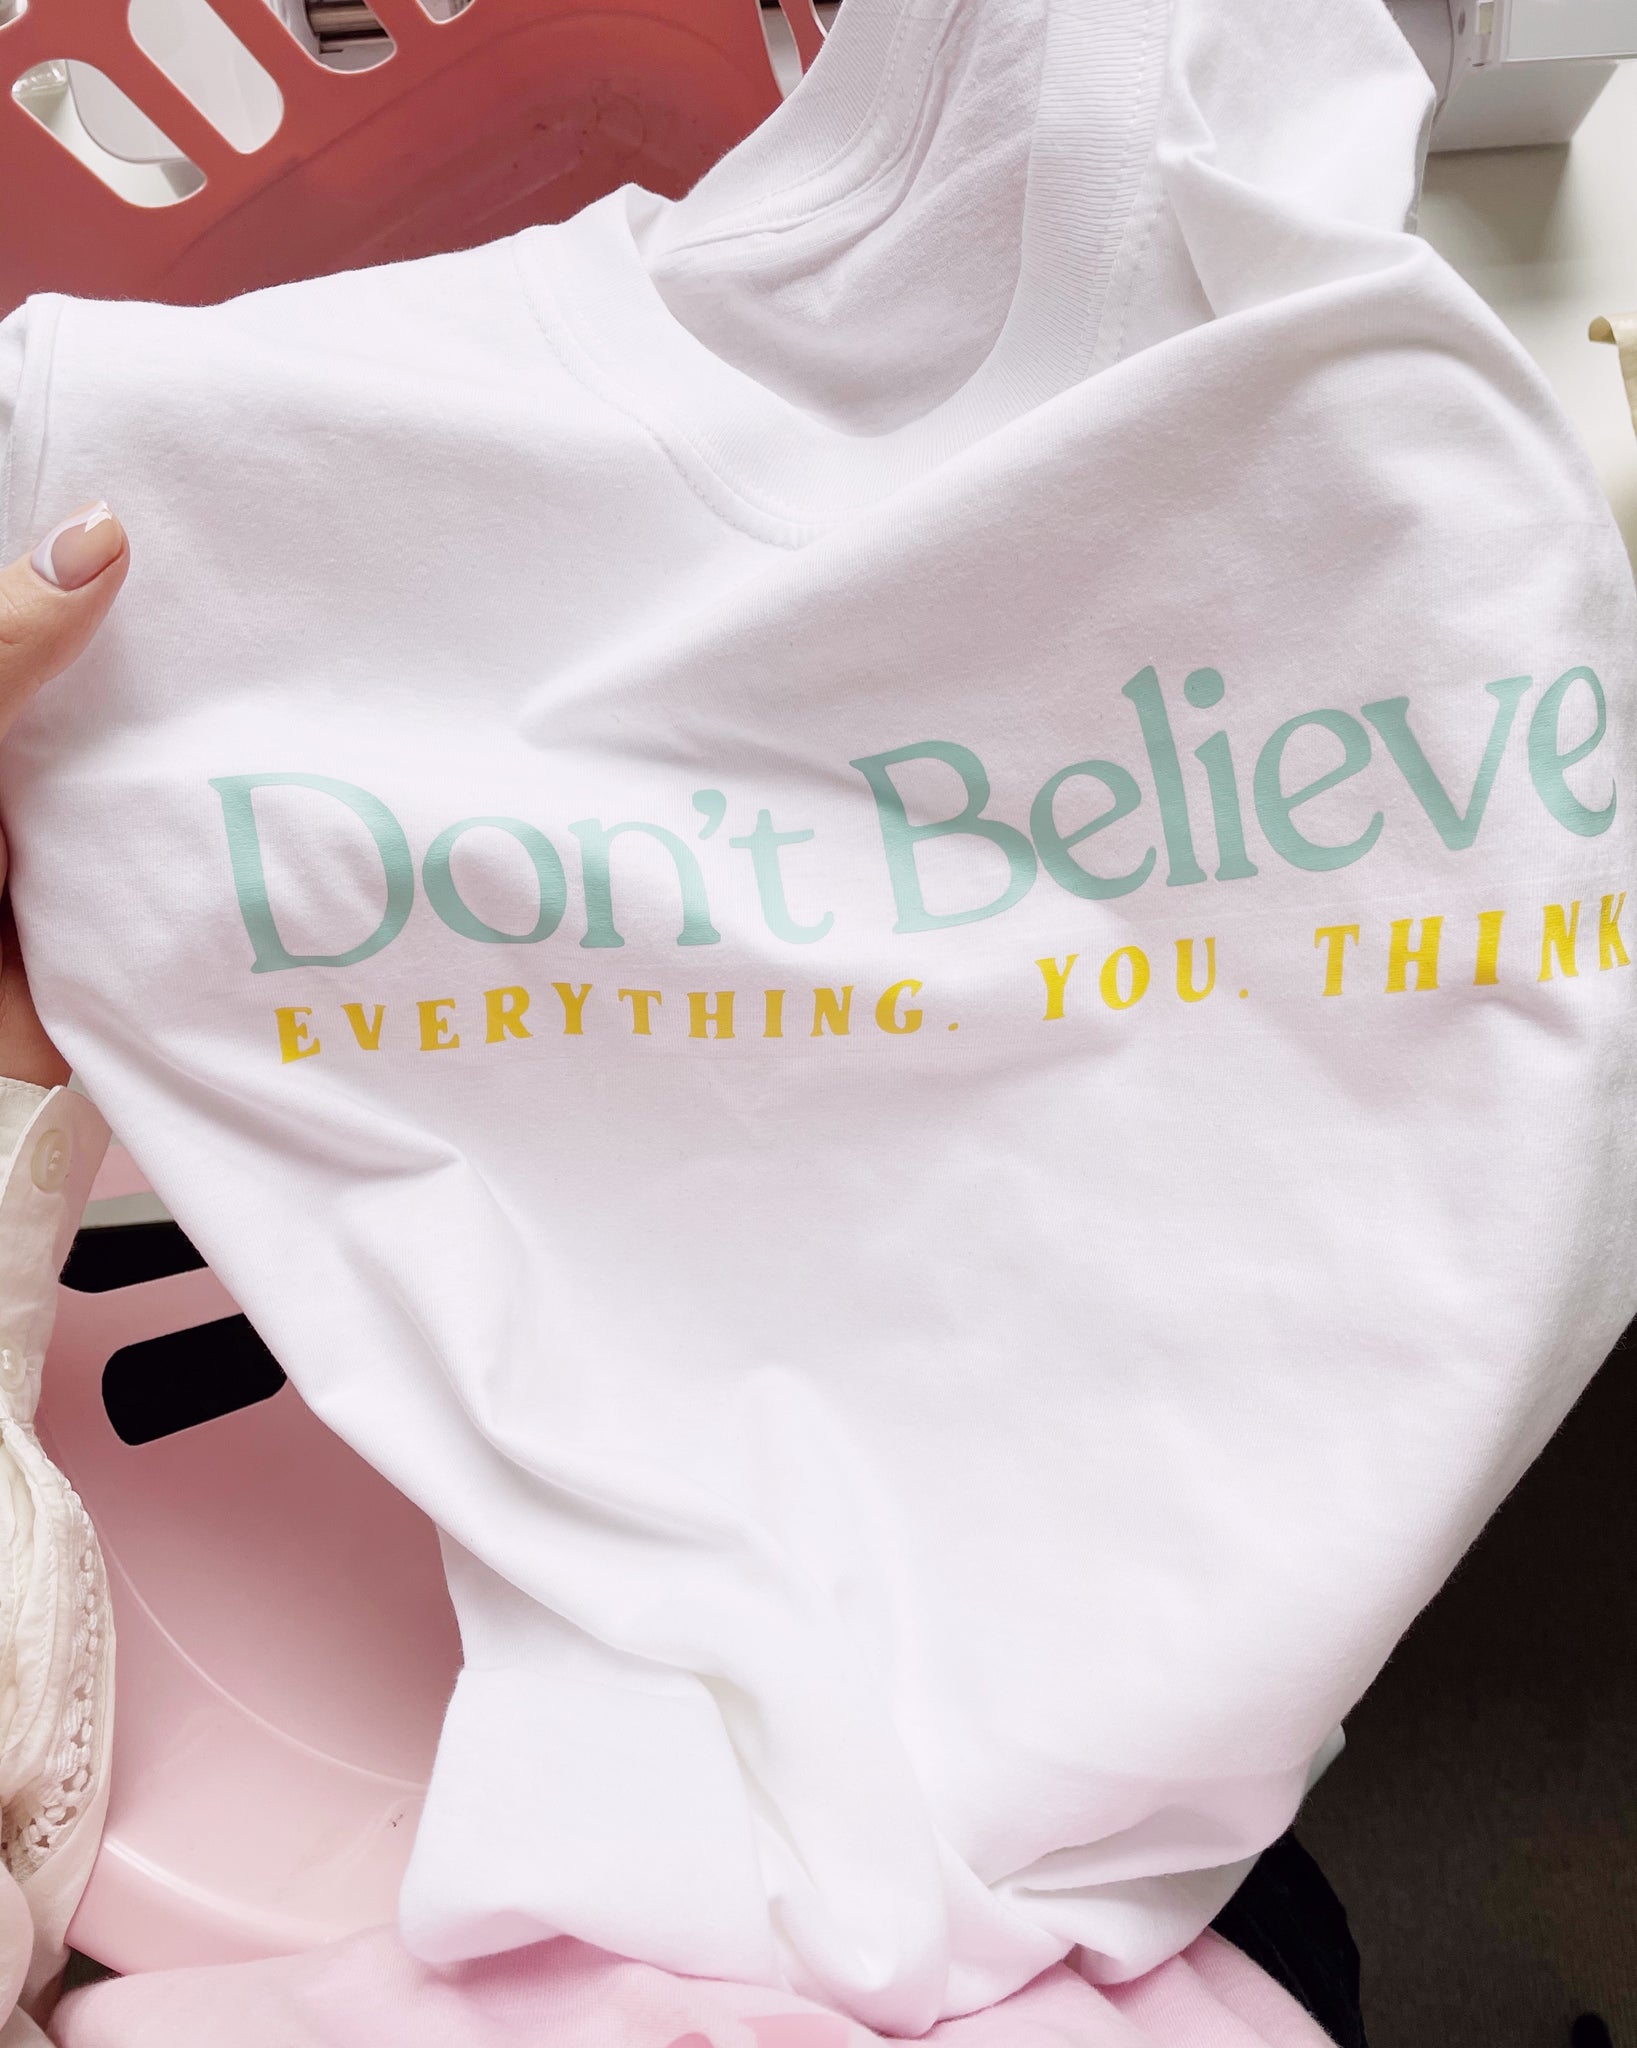 Don't Believe Everything You Think - Unisex Fit T-Shirt